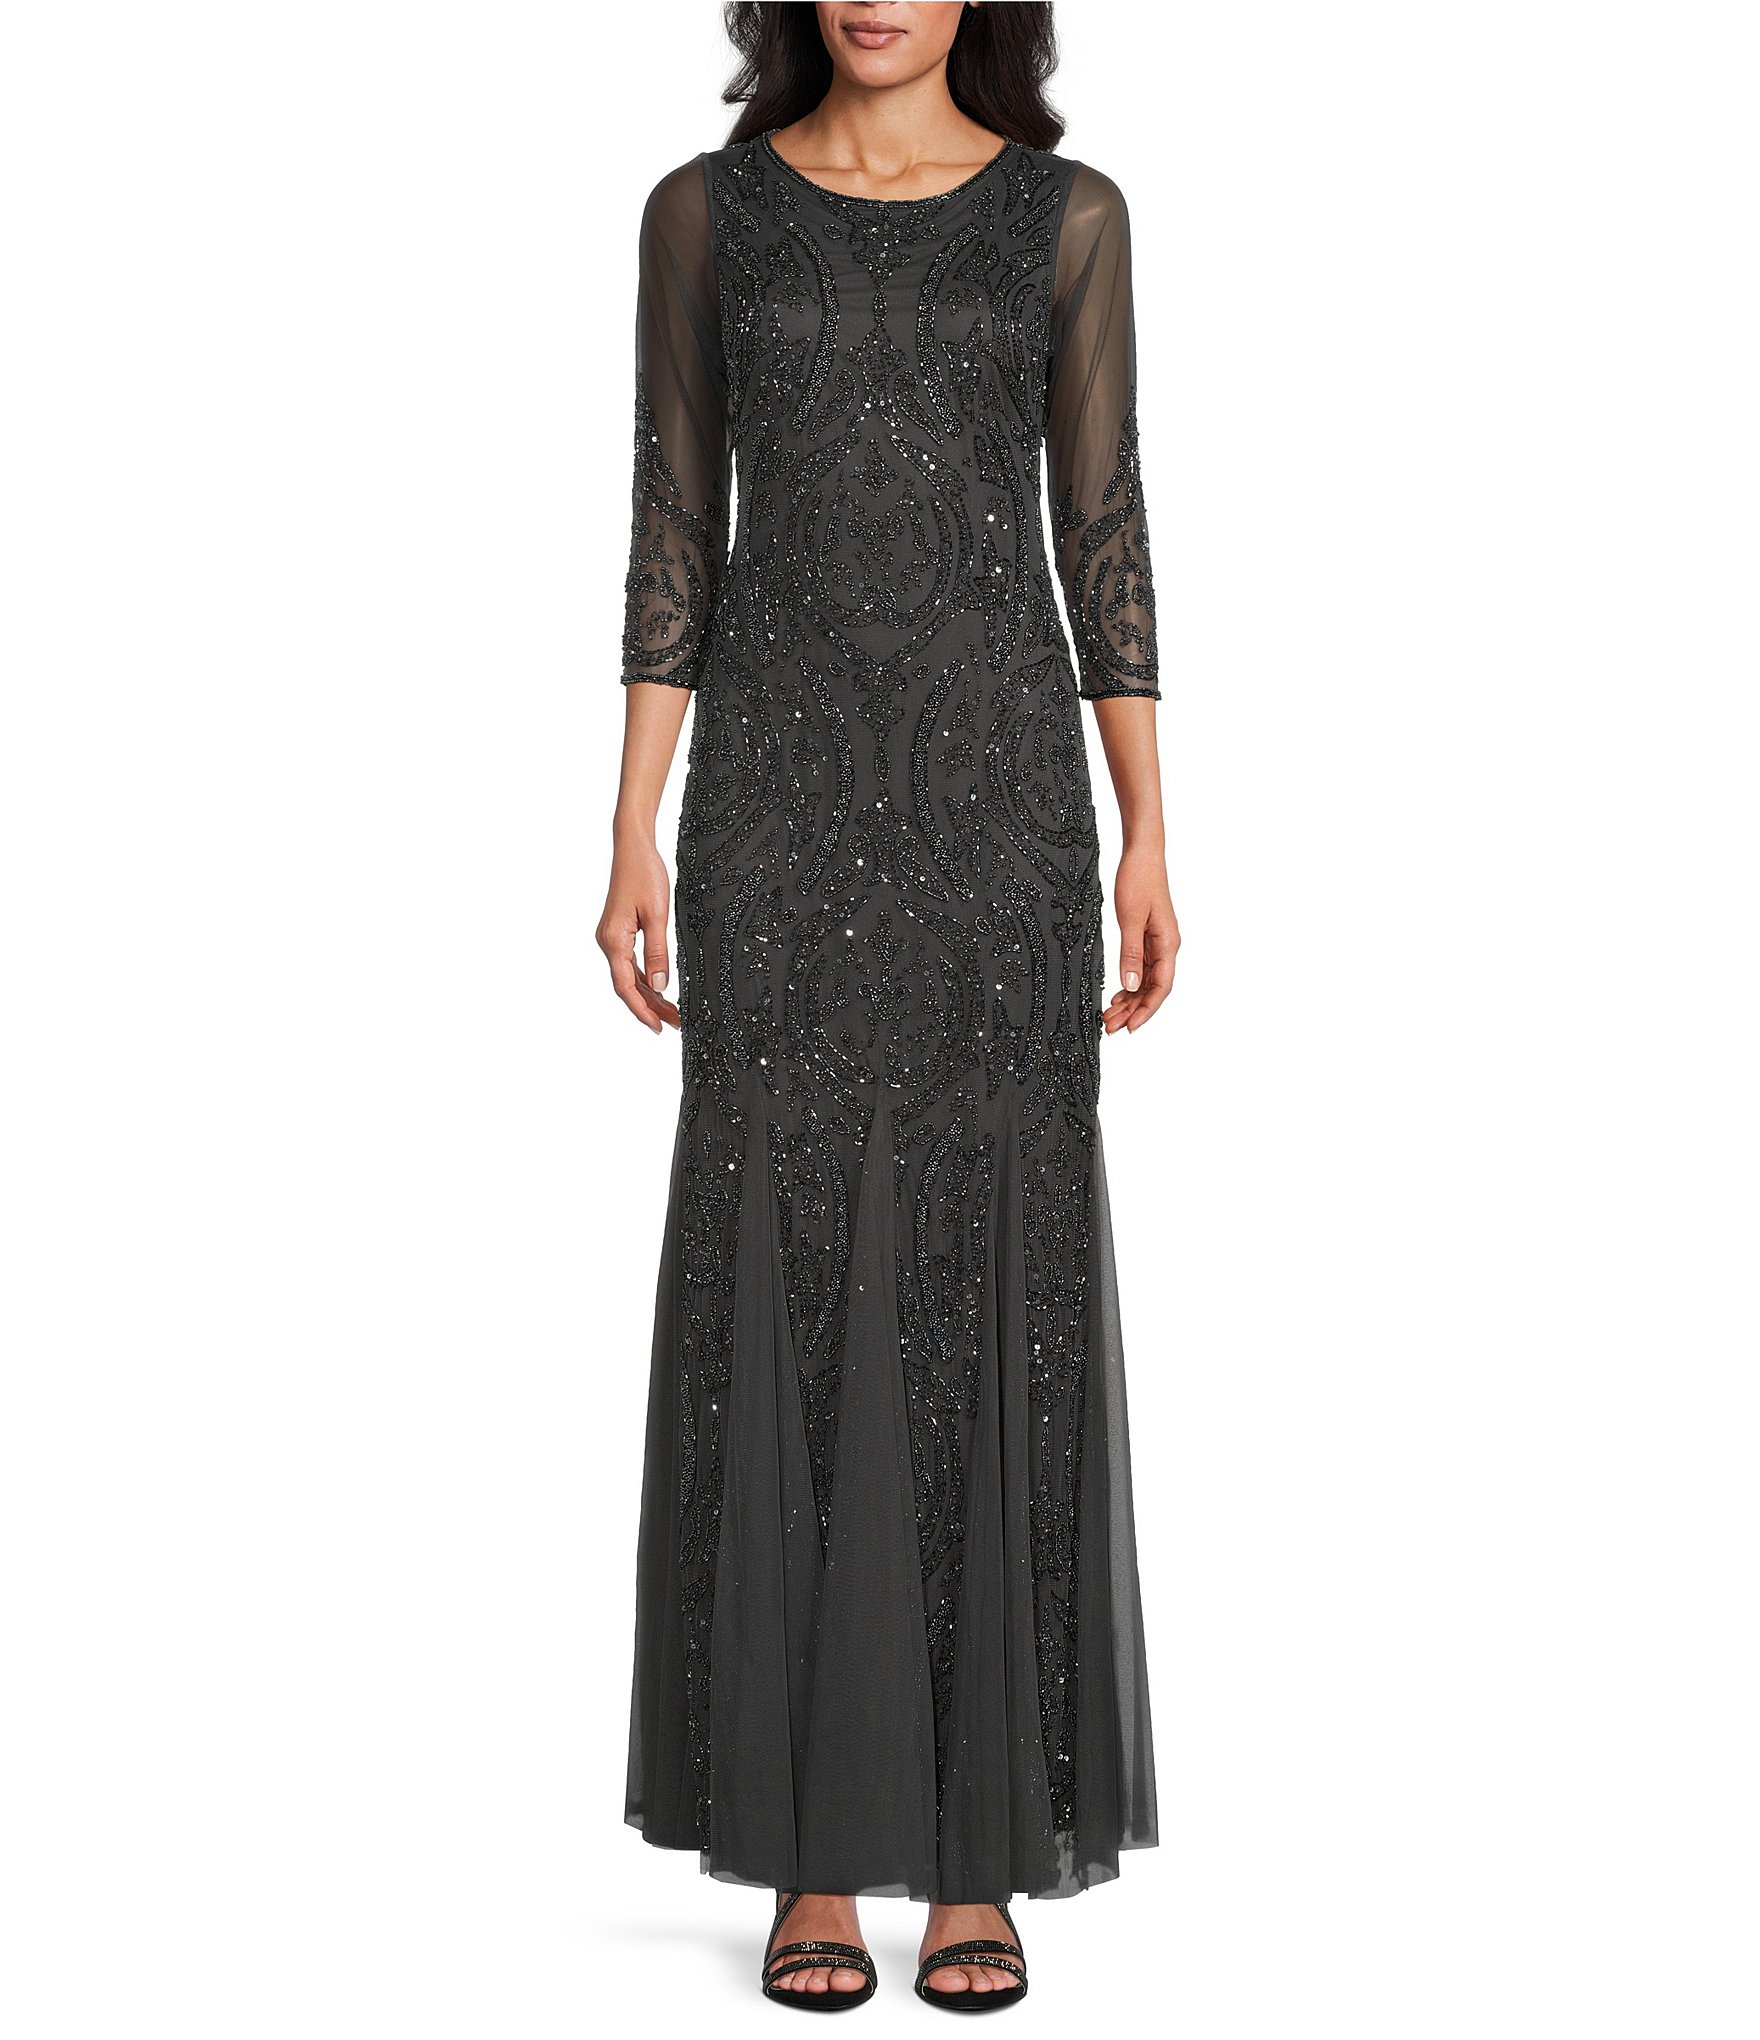 Clearance Floral Women's Formal Dresses & Evening Gowns | Dillard's